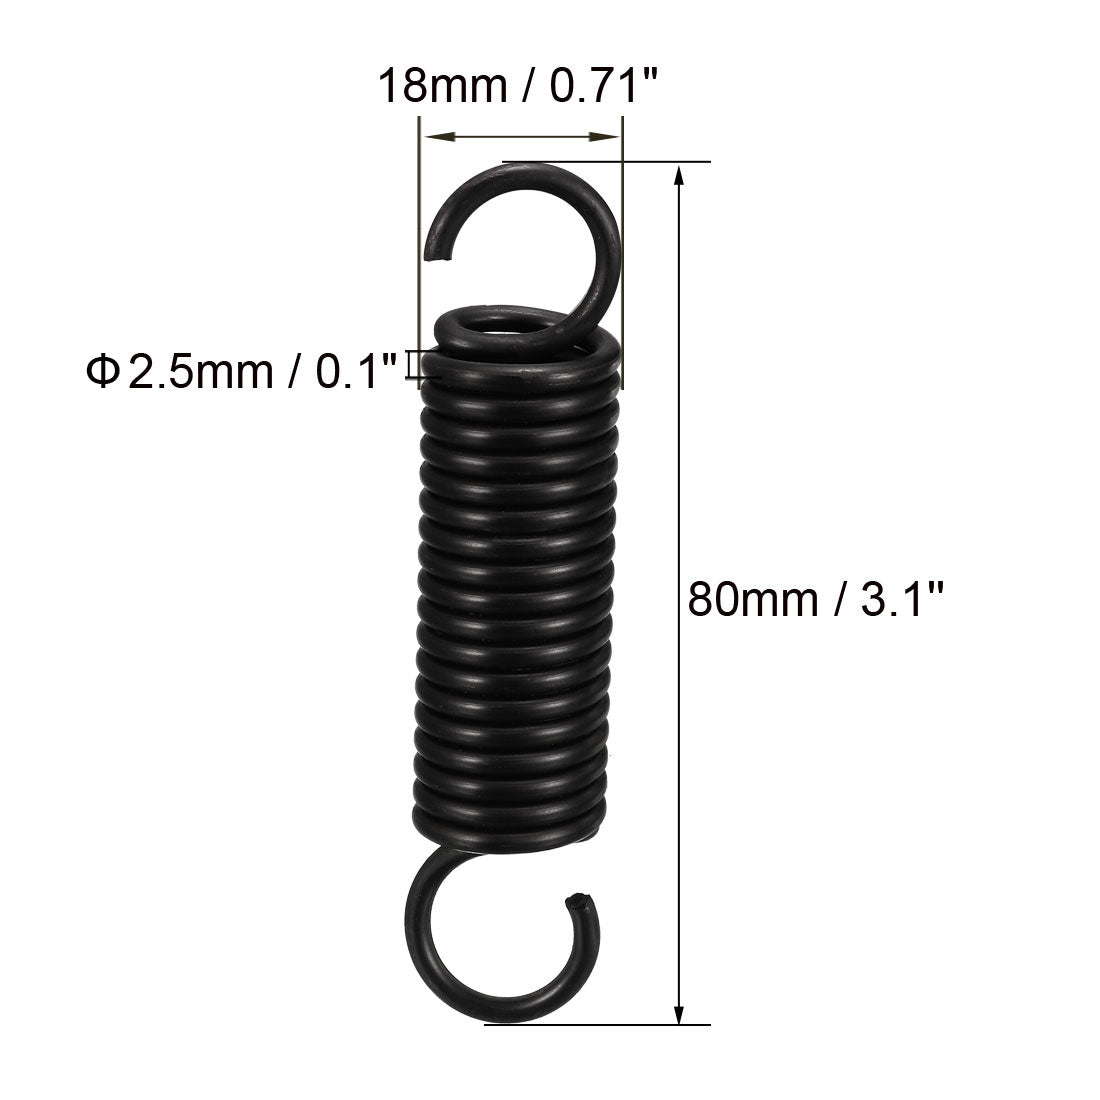 Uxcell Uxcell 2.5mm Wire Diax18mm ODx115mm Free Length Spring Steel Tension Spring 2pcs